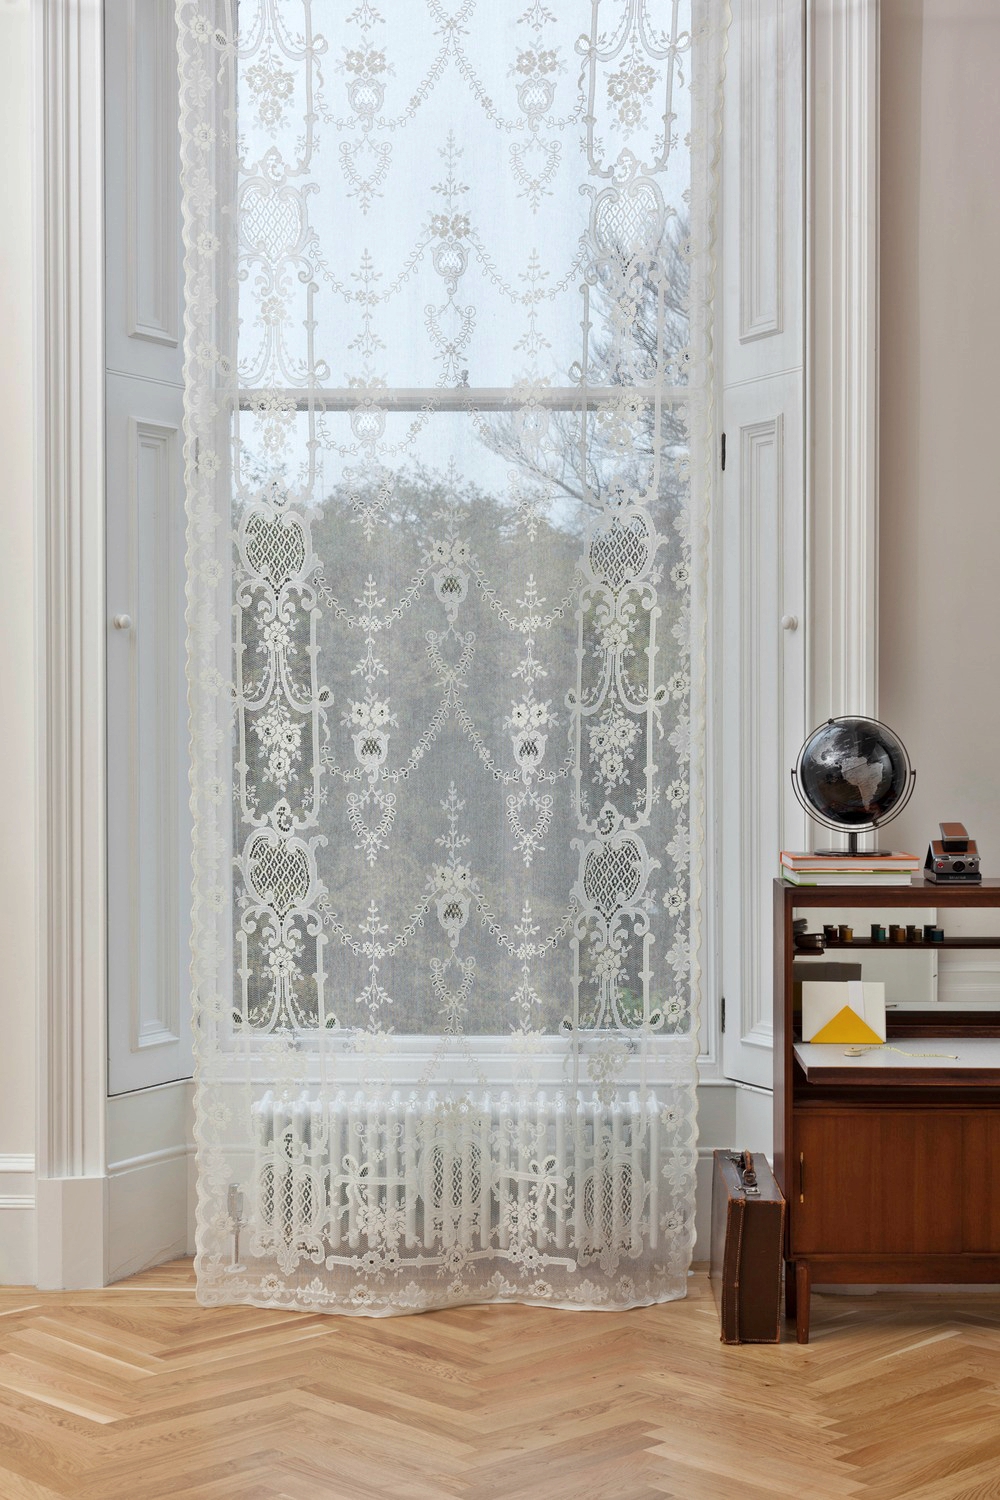 NEW Abbey Rose White Floral Lace Curtain by Lorraine 